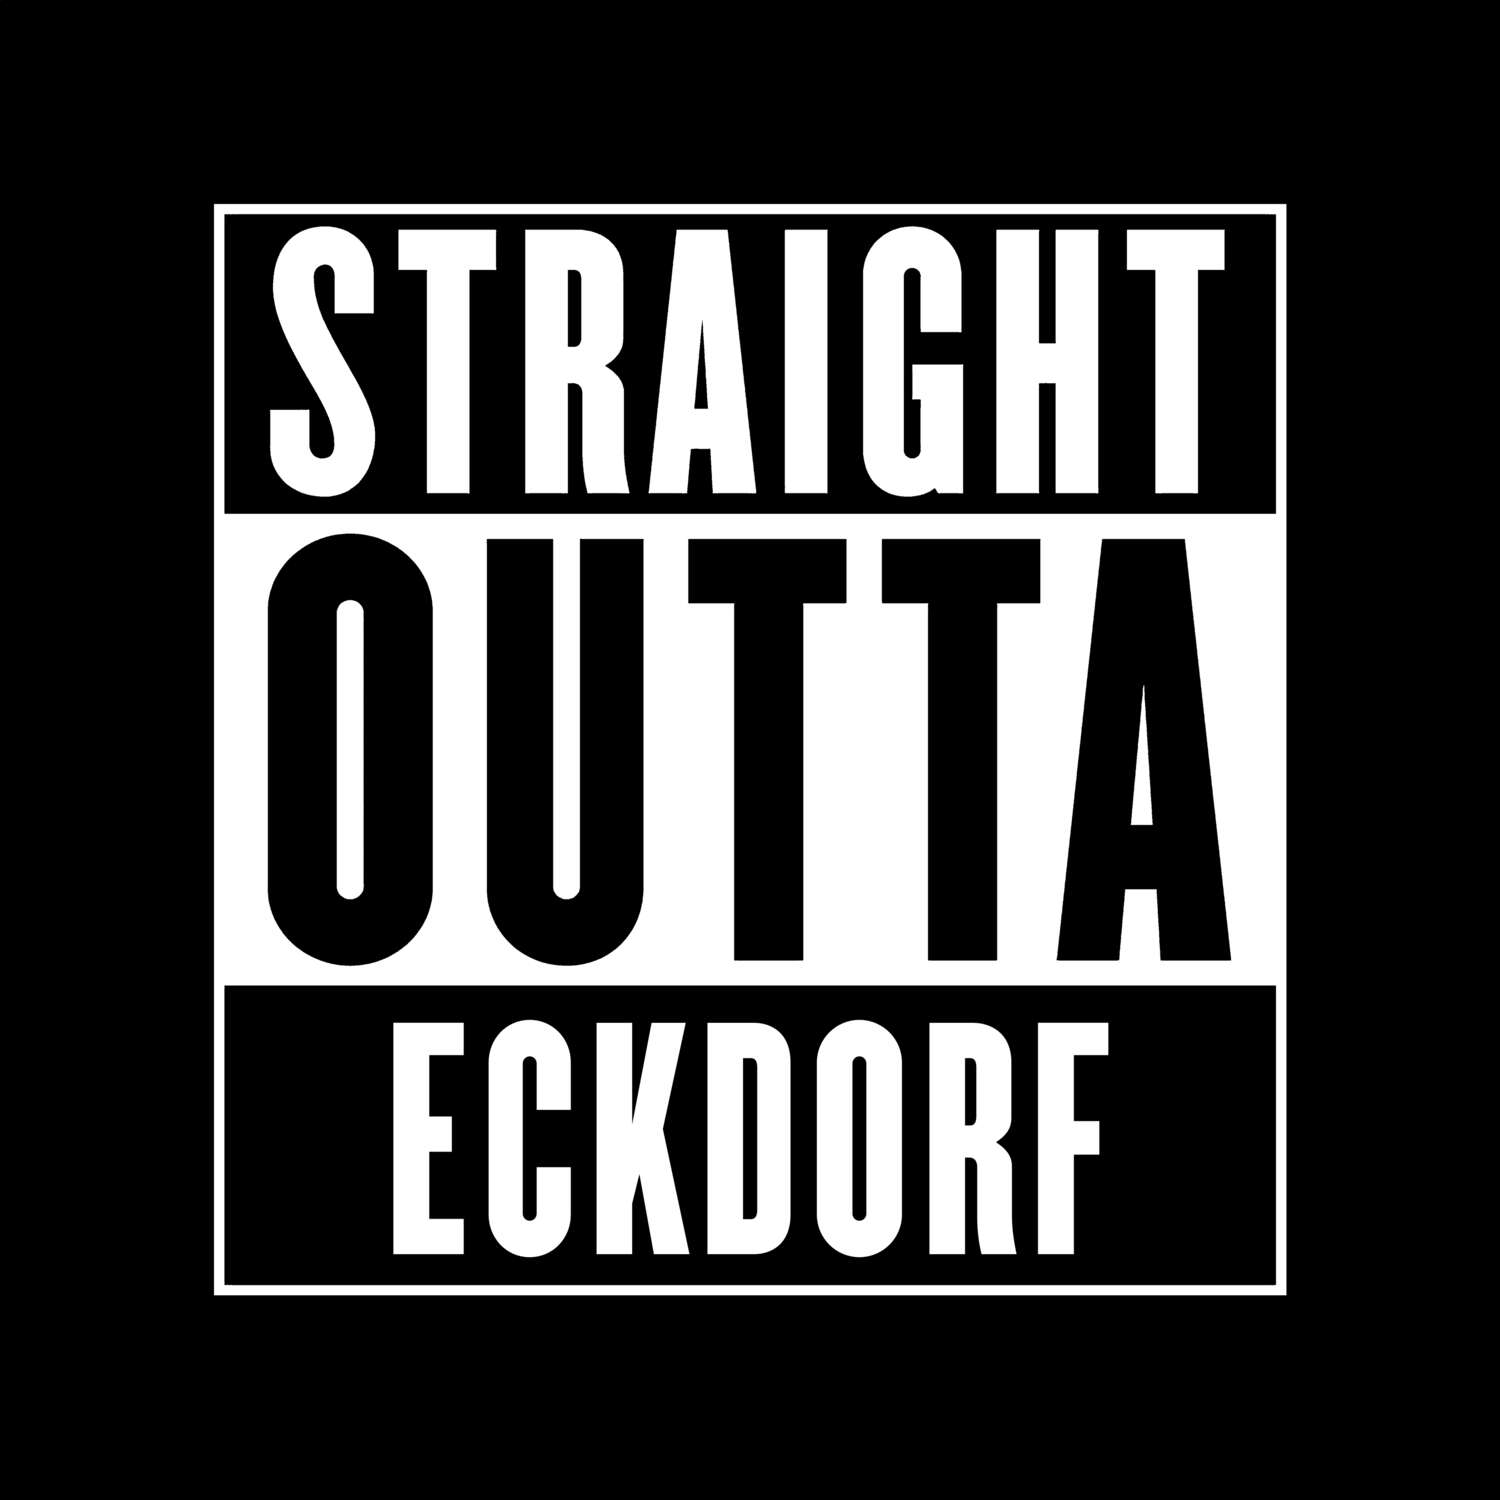 Eckdorf T-Shirt »Straight Outta«